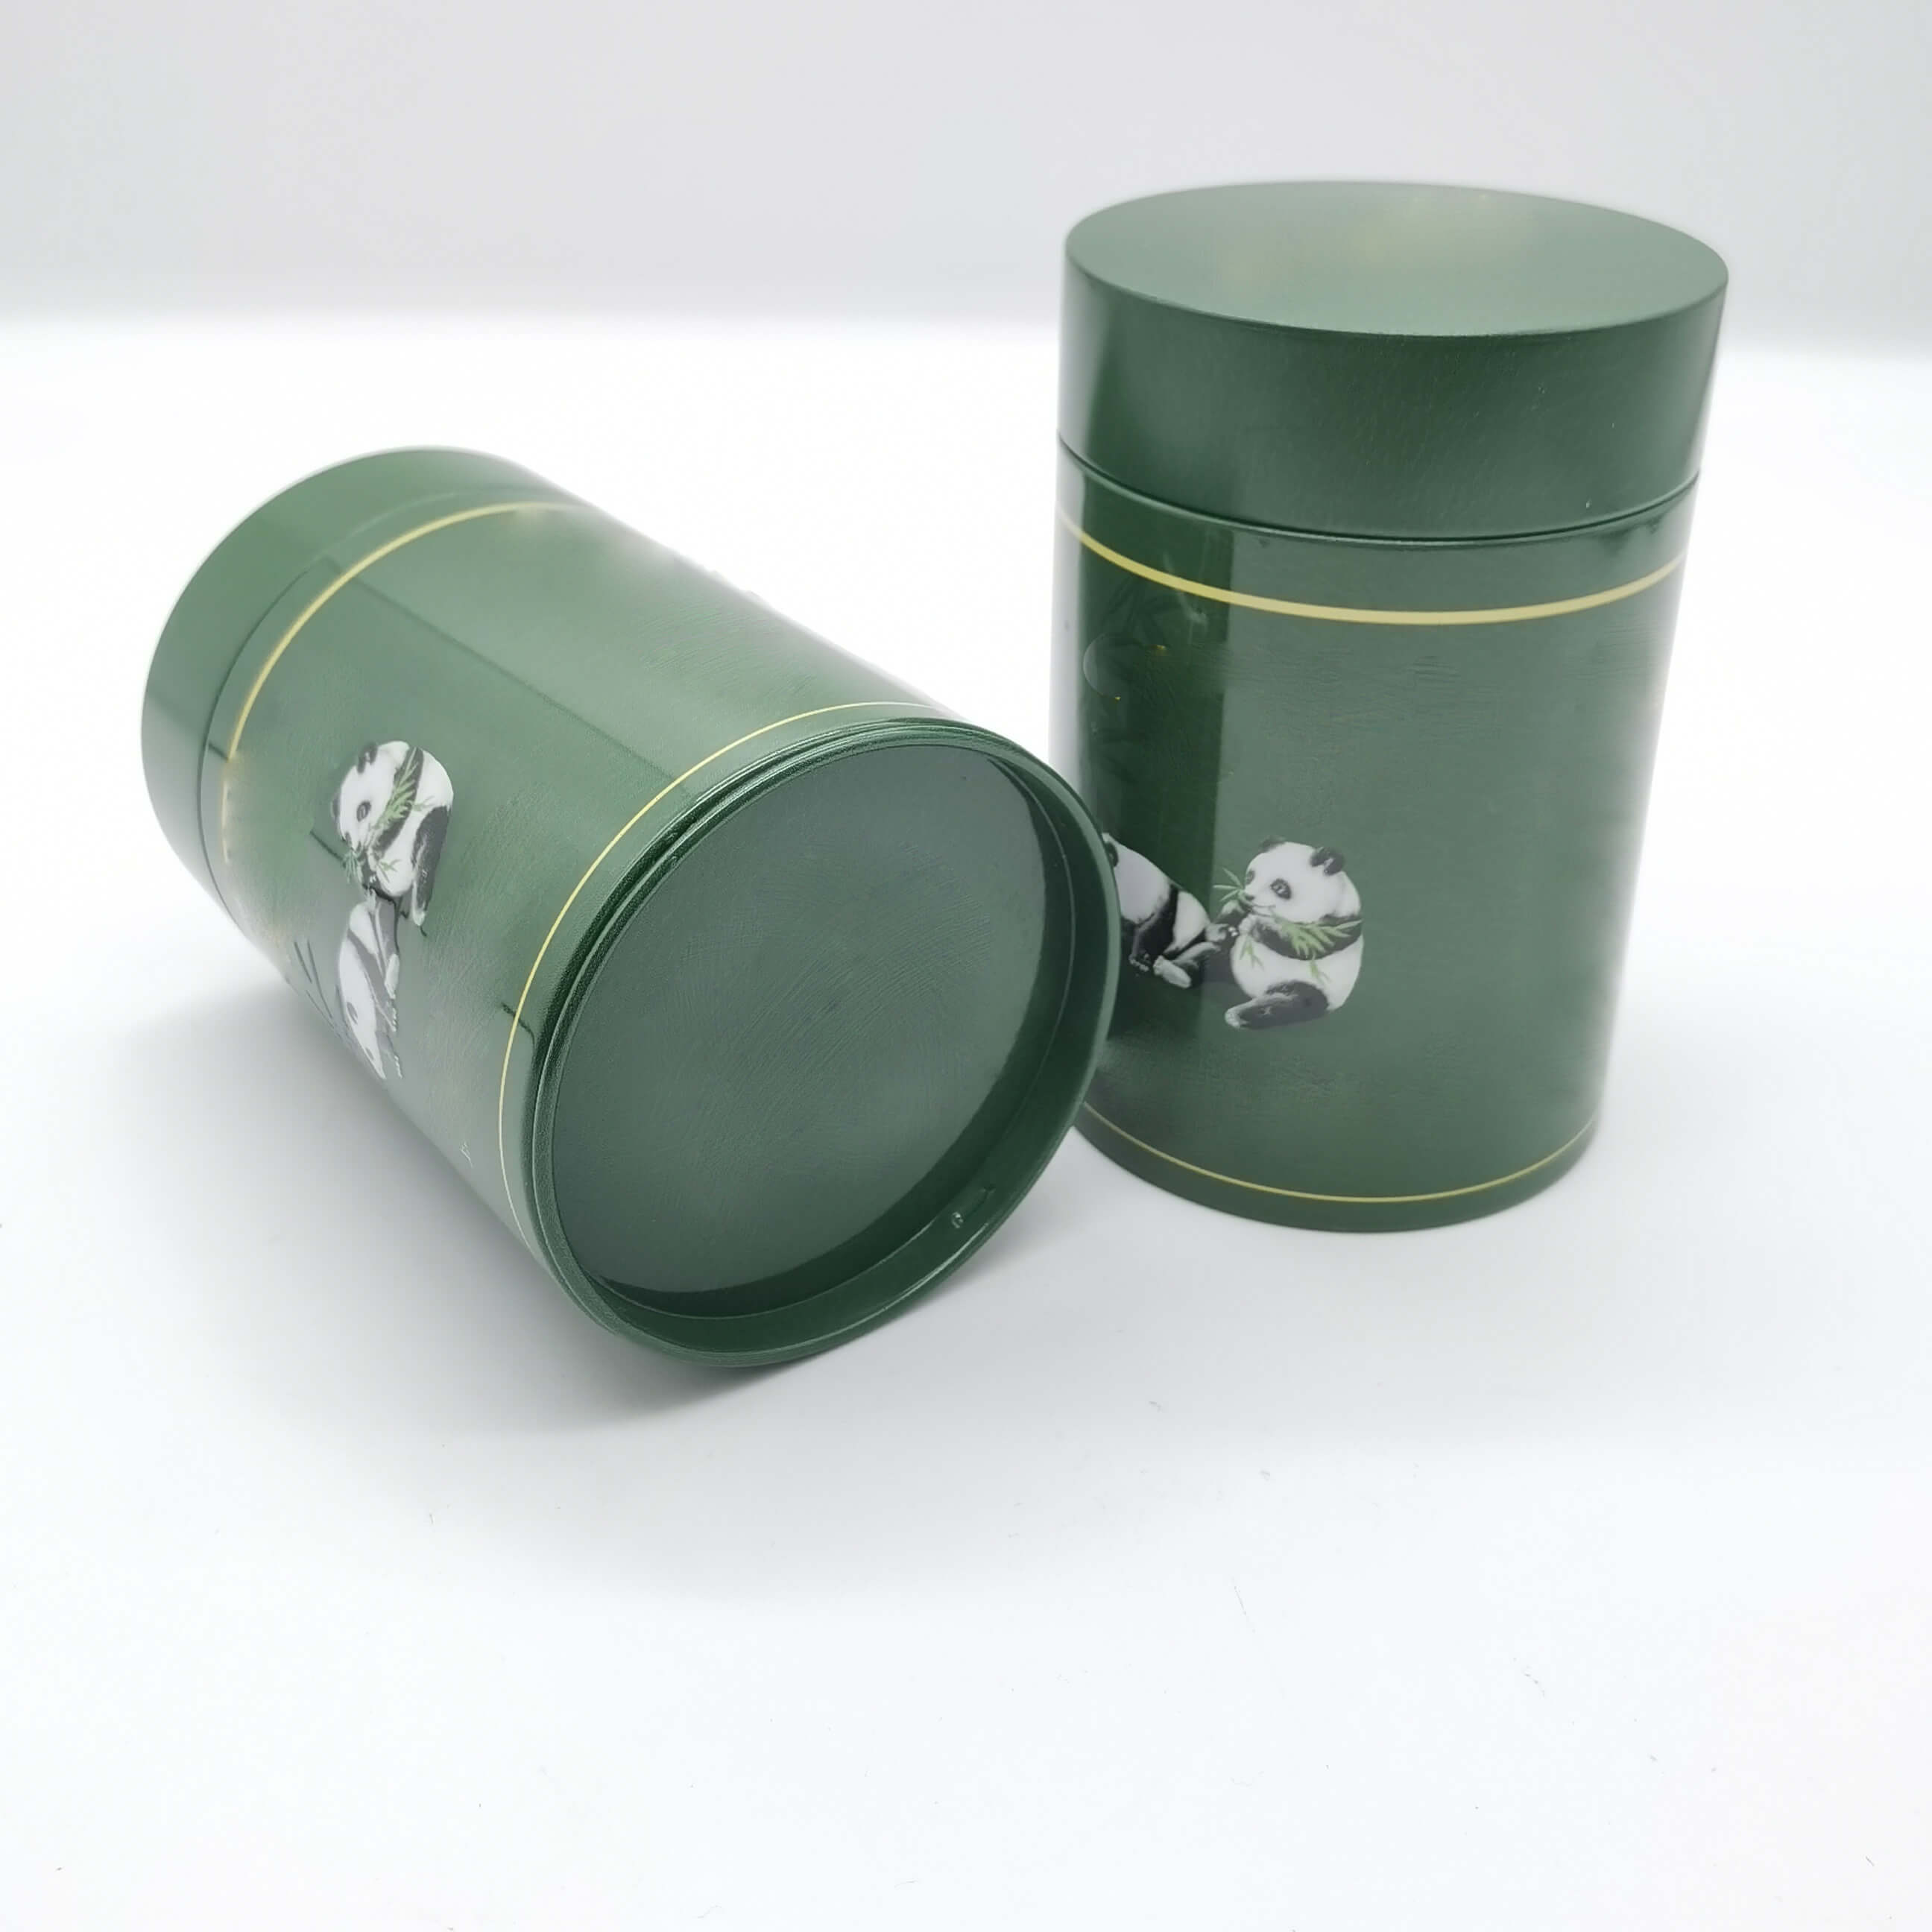 China RB039 cigarettes tin can Manufacturers, Factory - Buy RB039 cigarettes tin can at Good Price - Haohang